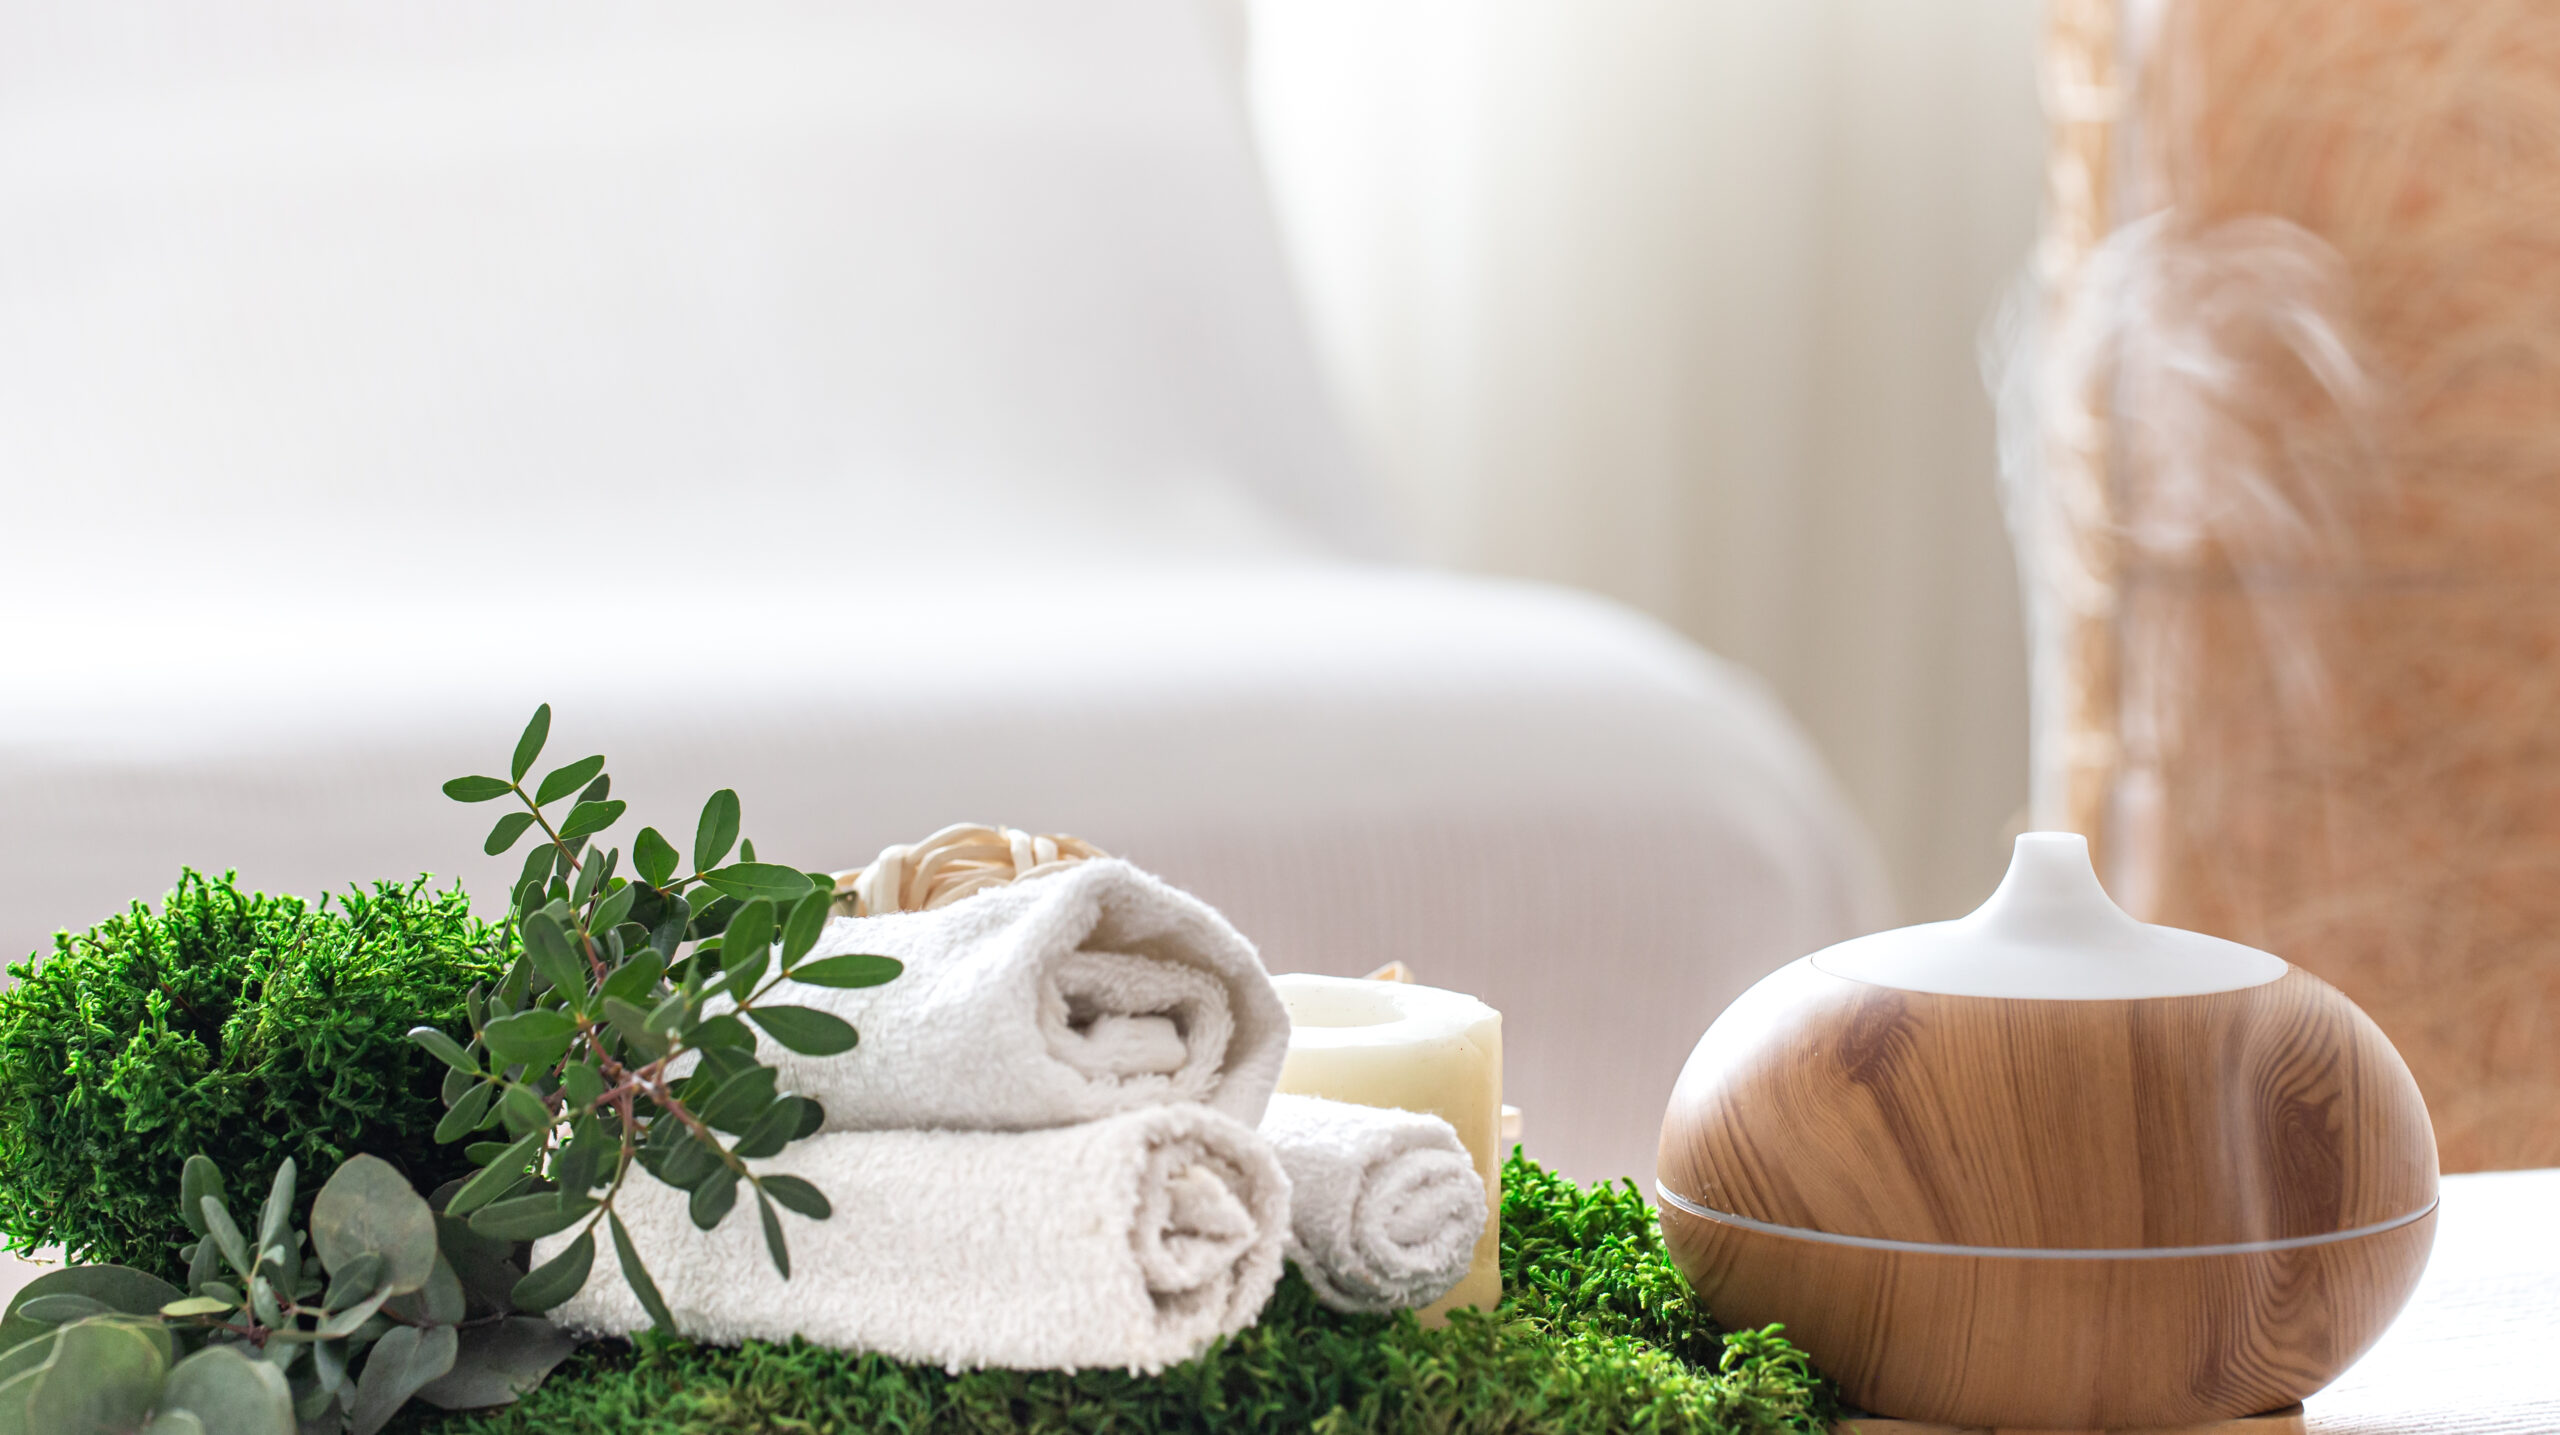 Spa composition with aromatherapy and body care items